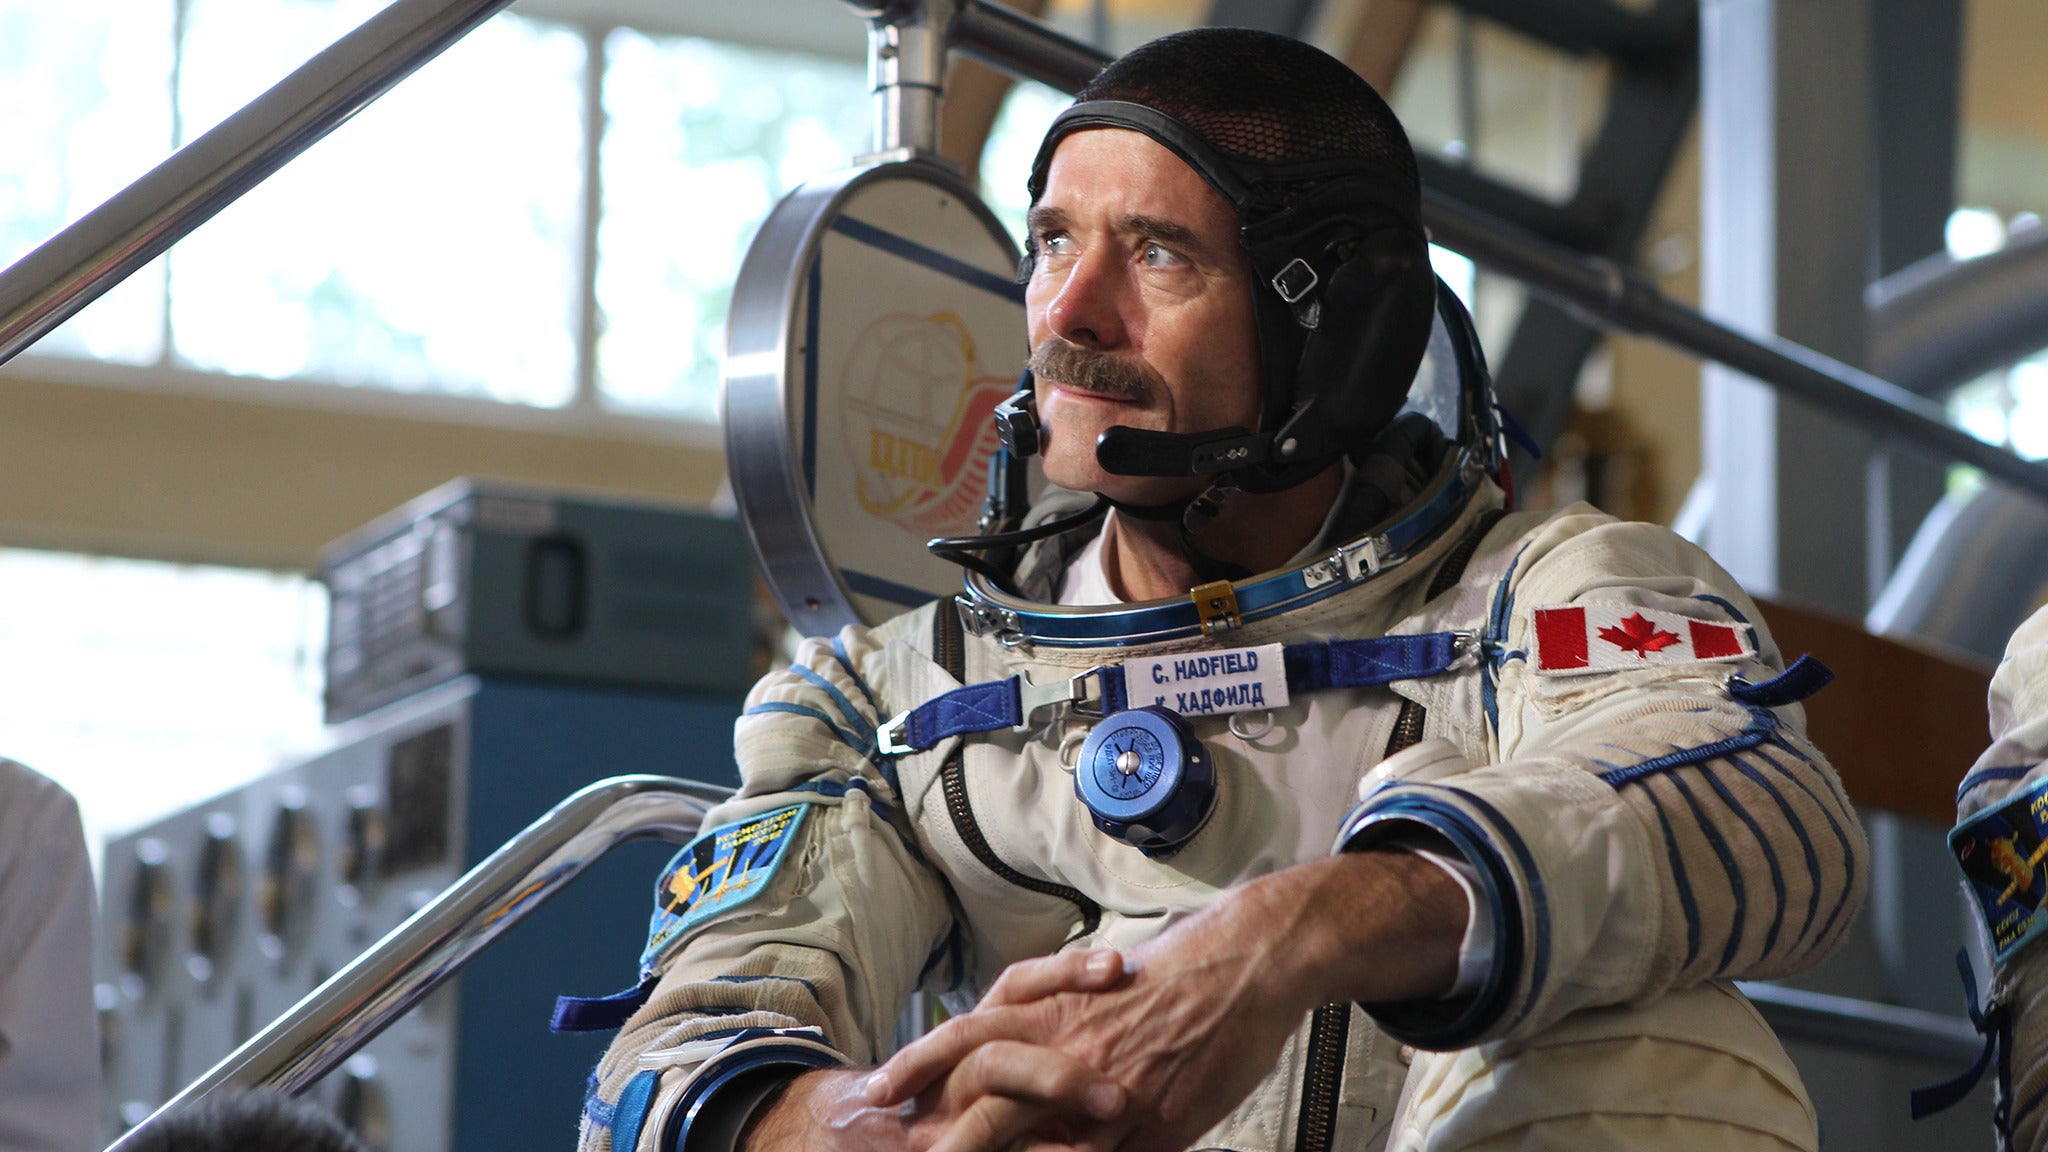 Chris Hadfield Presents Exploration: Where We're Going Next in Ottawa promo photo for Live Nation Mobile App presale offer code